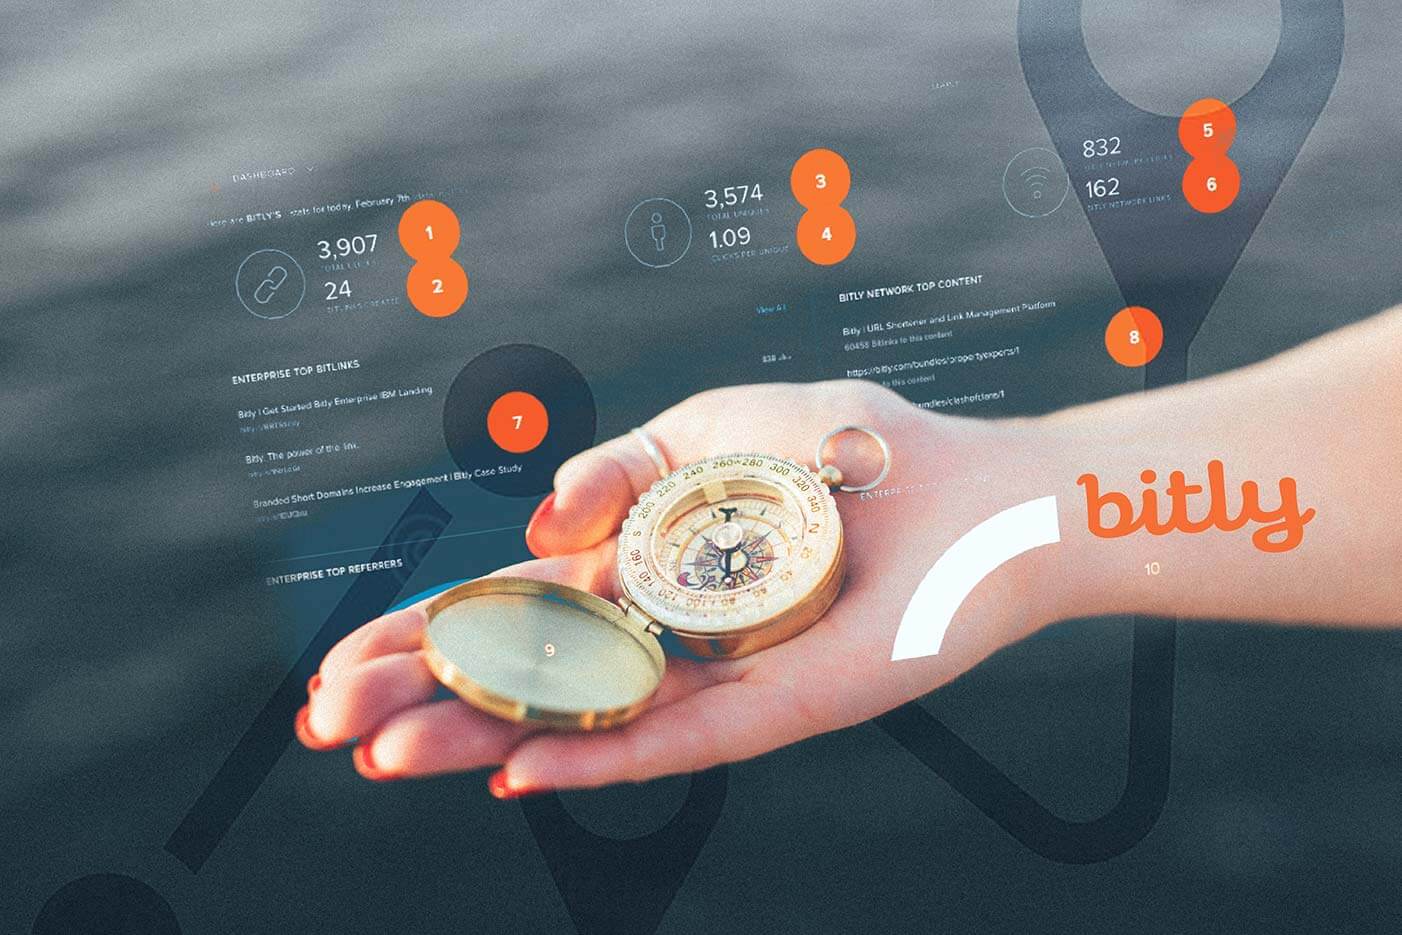 compass-in-hand-with-title-bitly